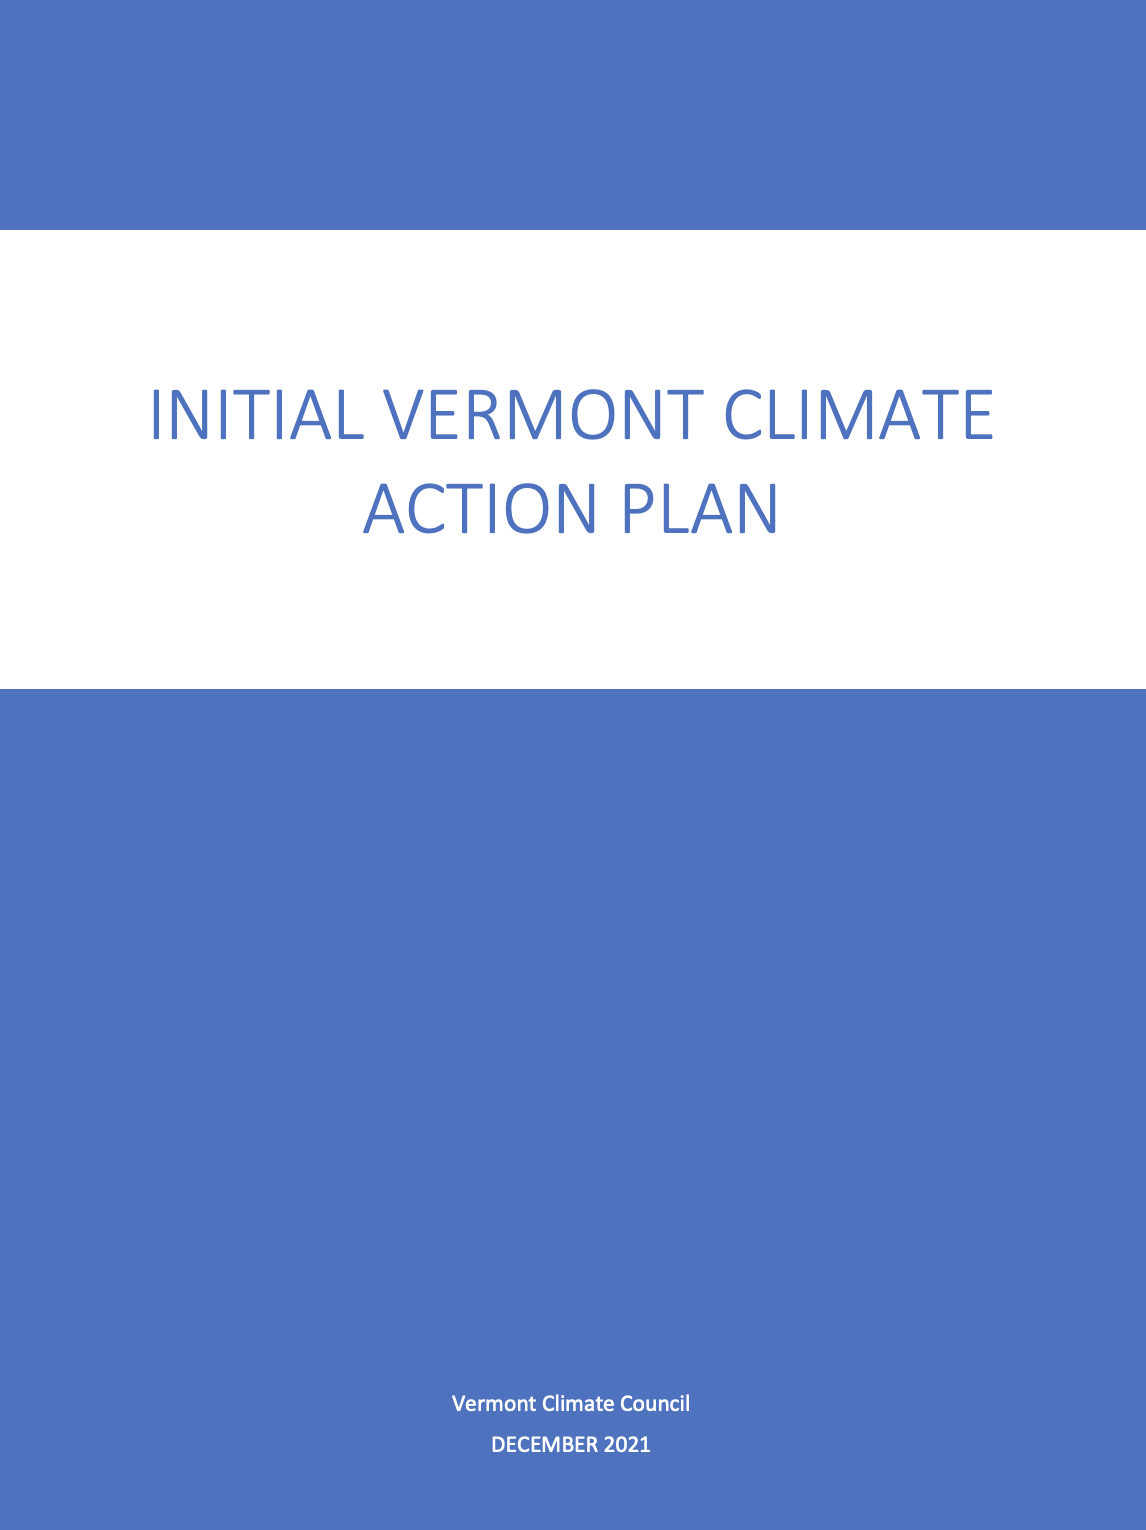 Report cover with words: Initial Vermont Climate Action Plan